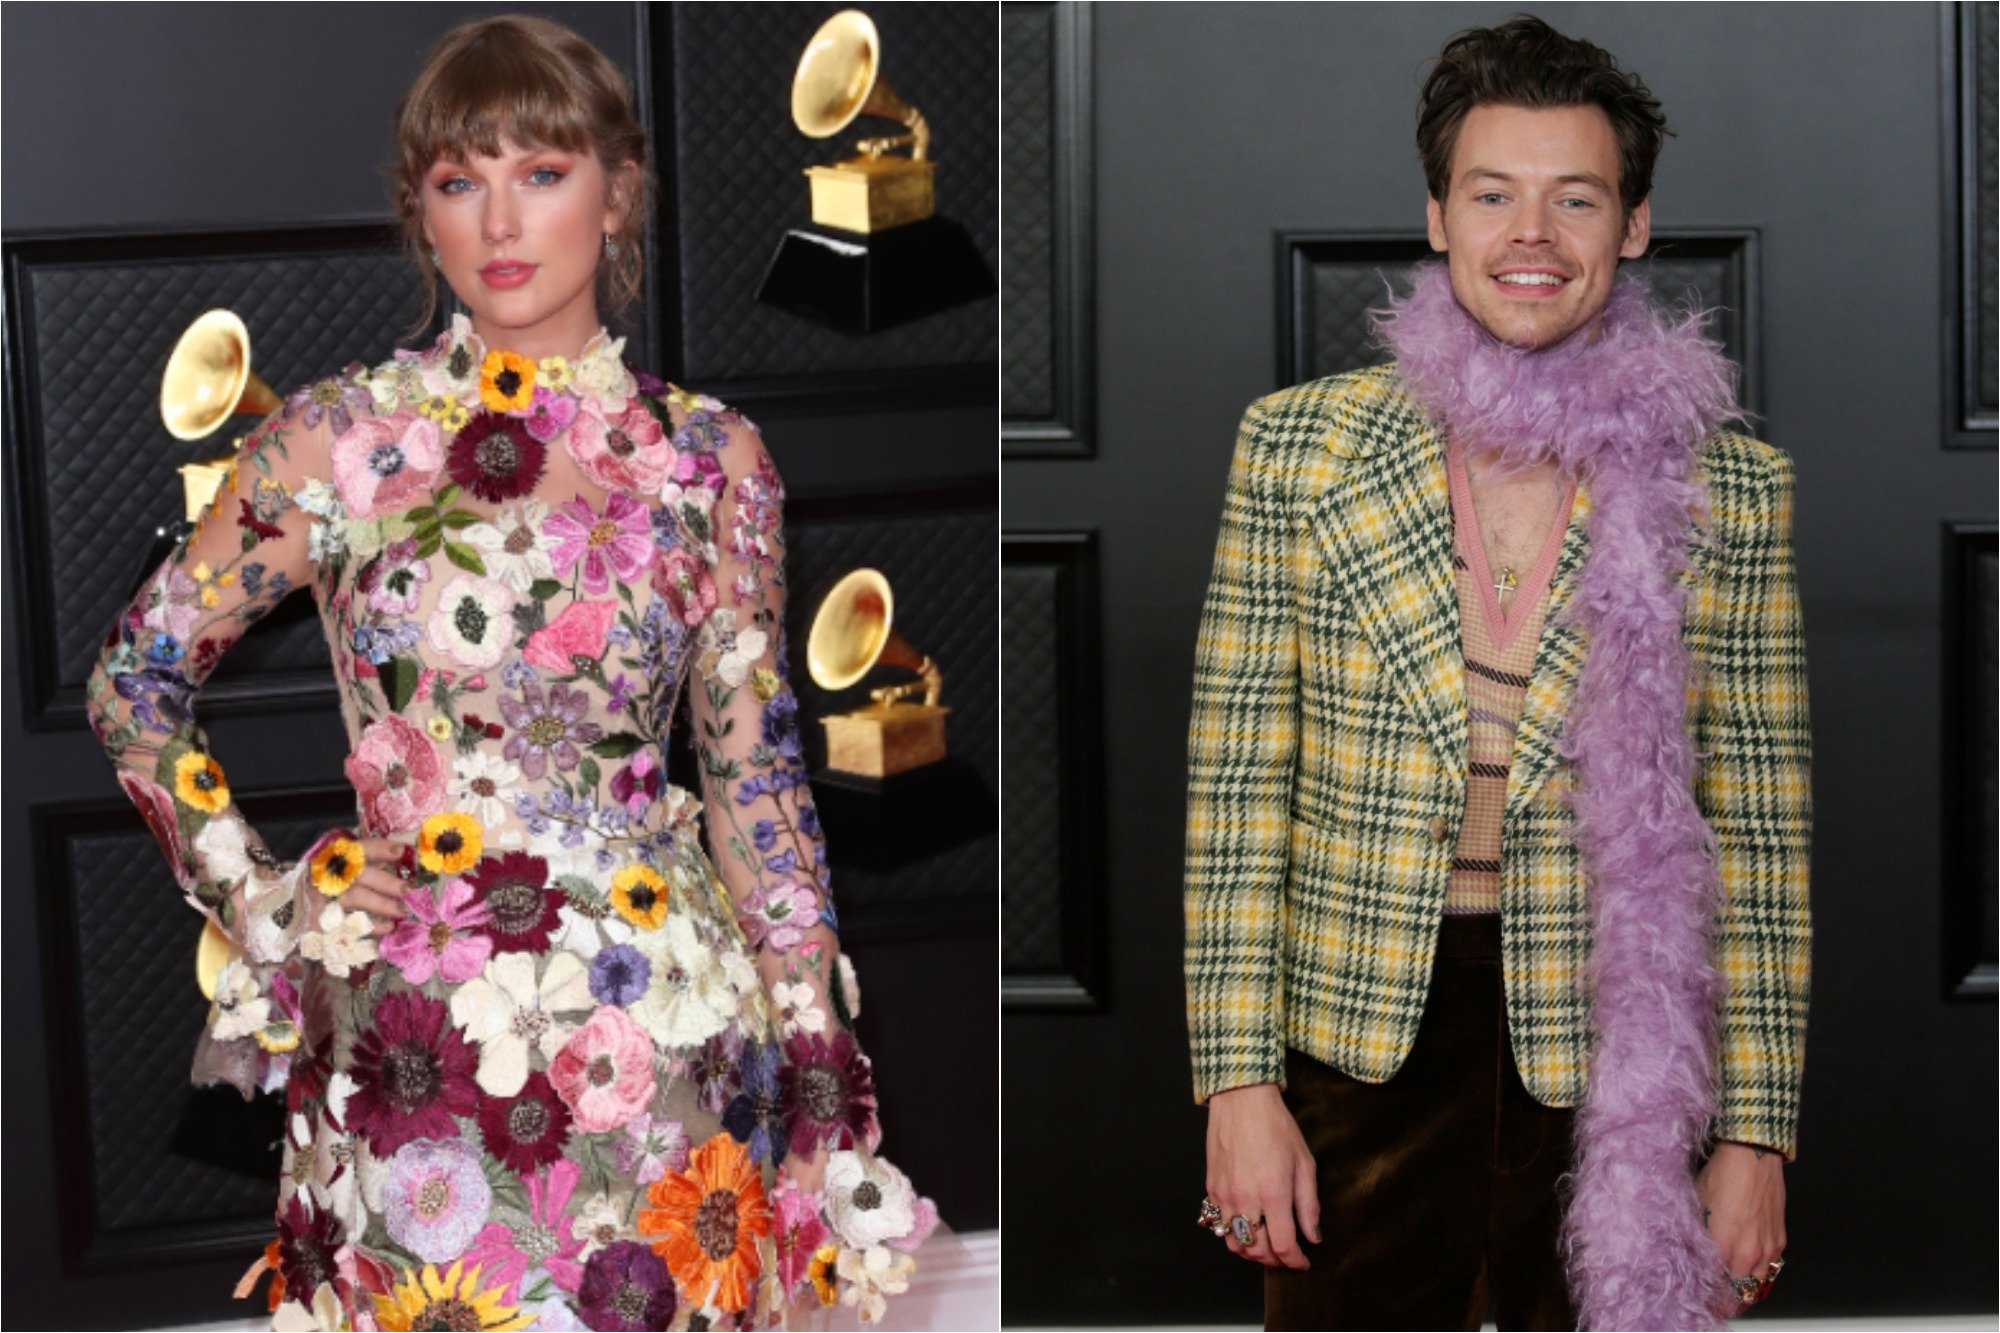 (L) Taylor Swift on the red carpet at the 63rd Annual Grammy Awards on March 14, 2021 / (R) Harry Styles at THE 63rd ANNUAL GRAMMY® AWARDS on March 14, 2021